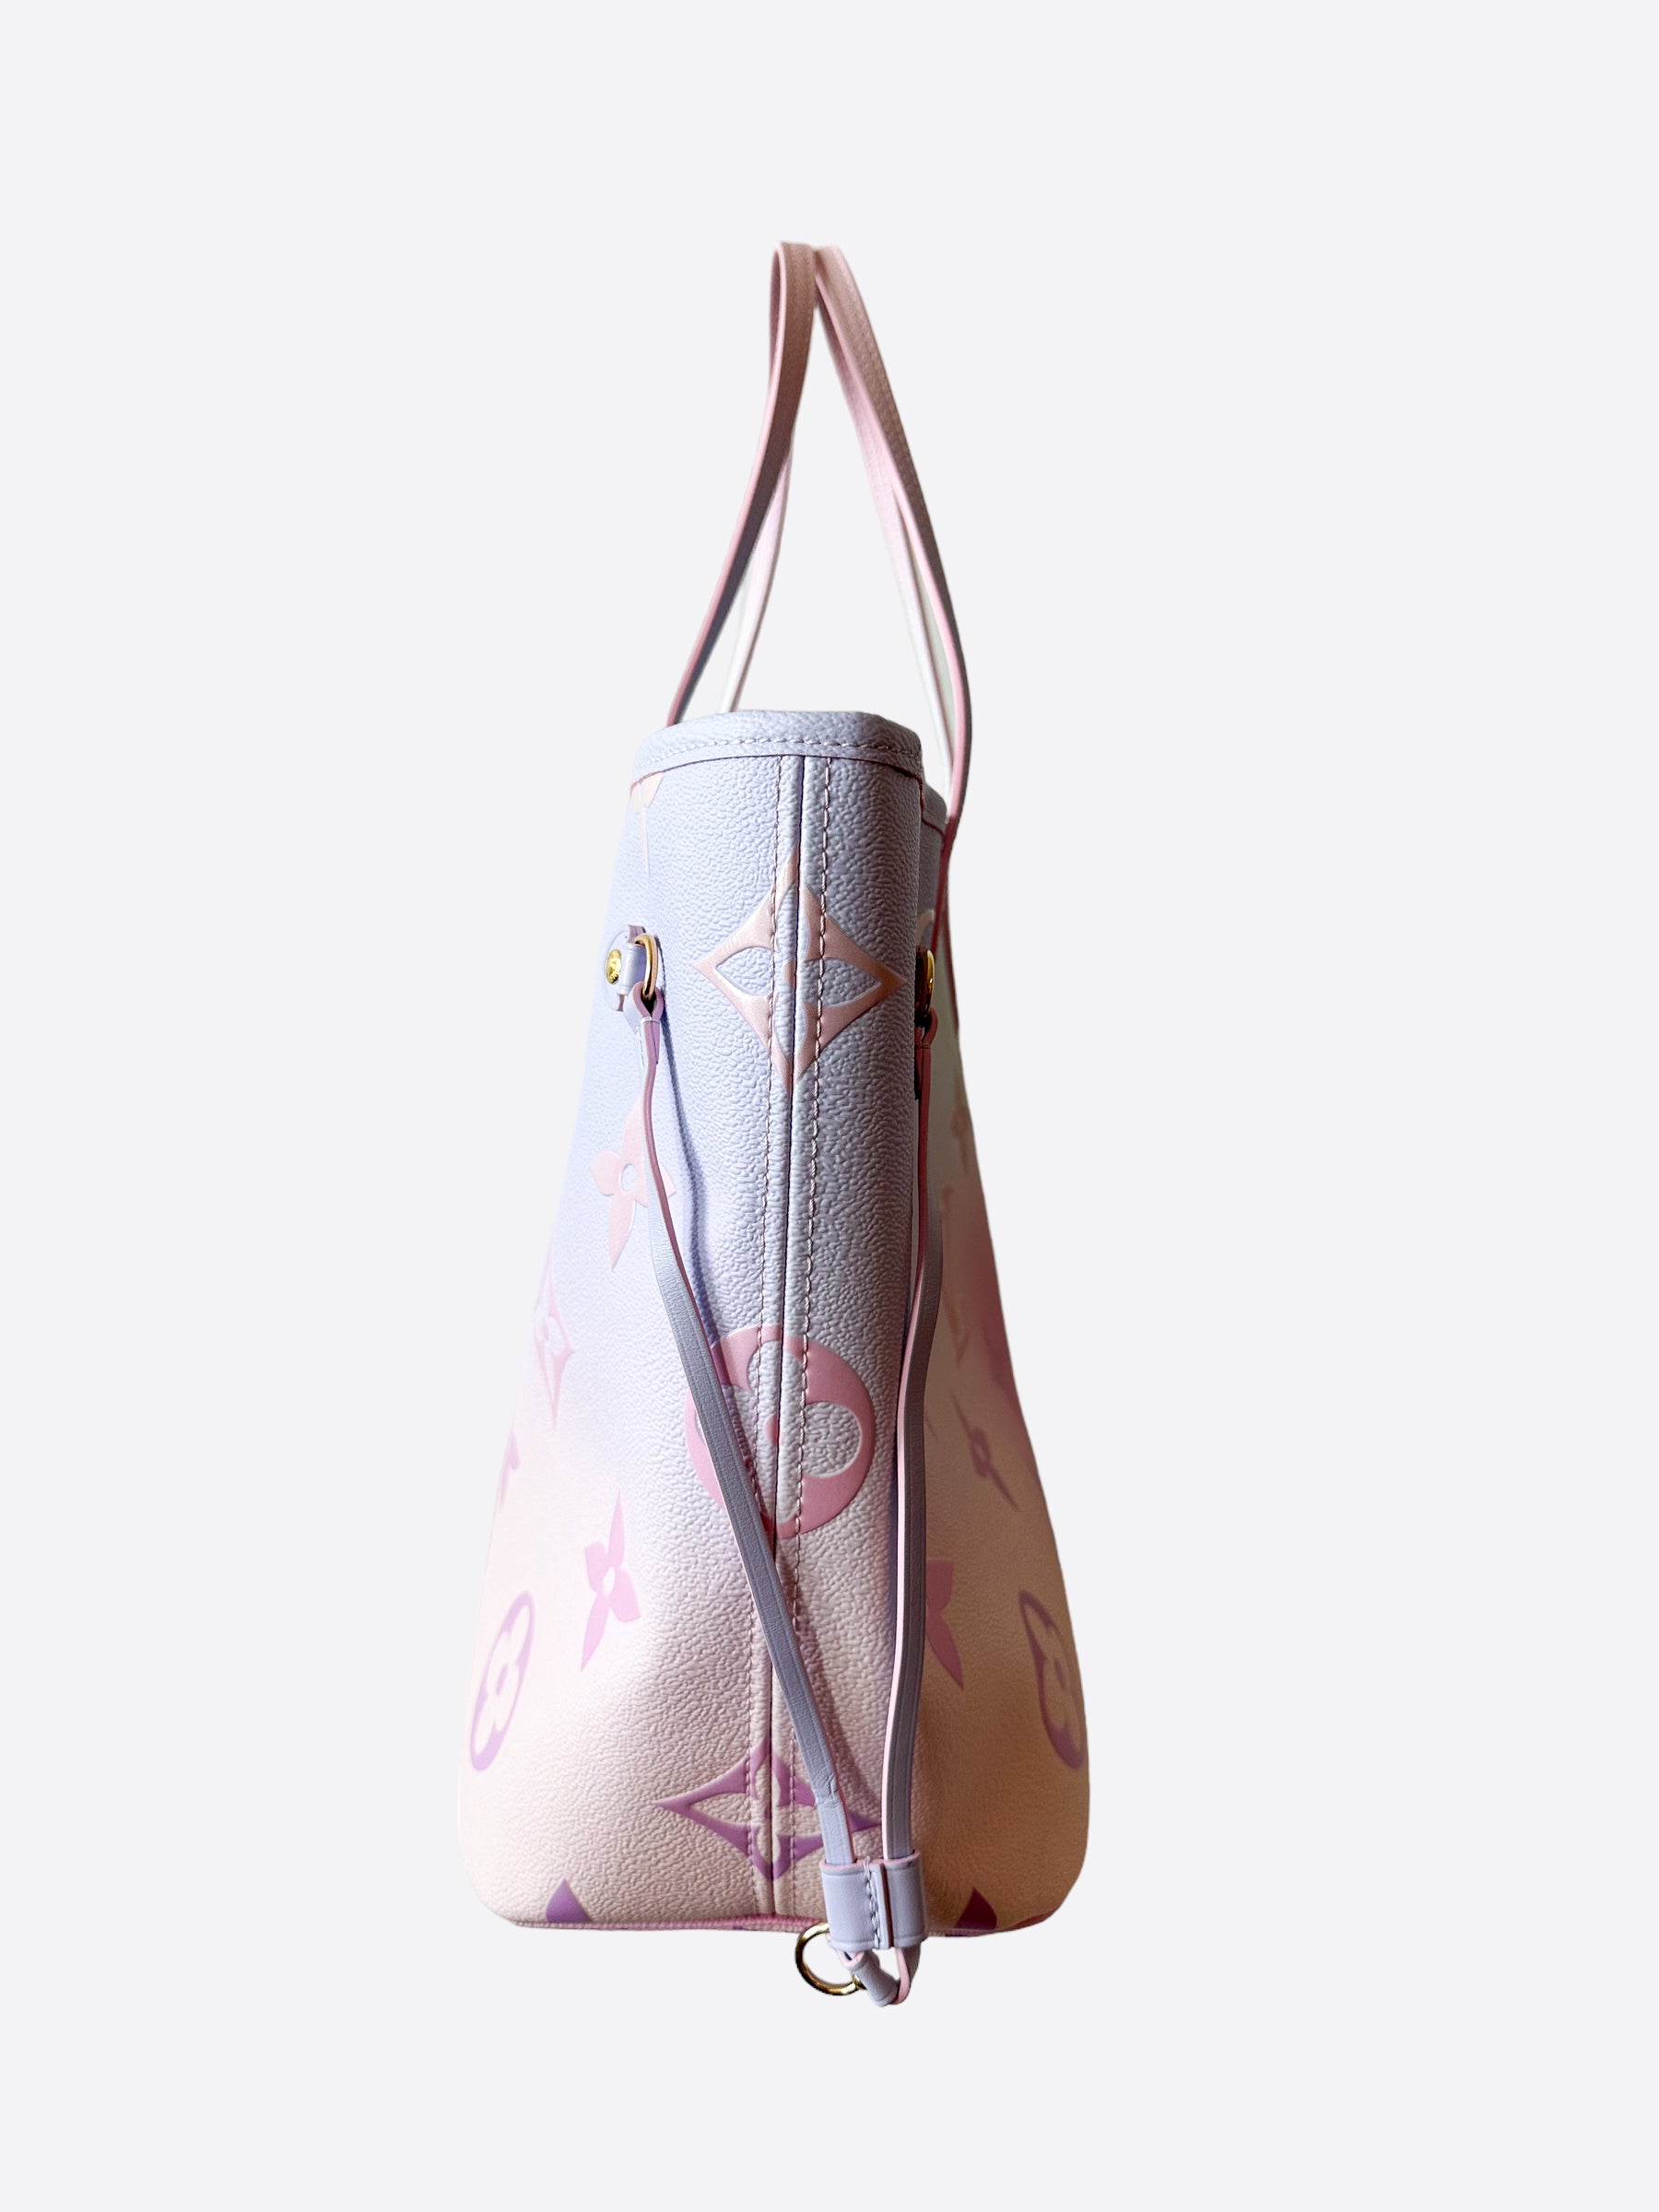 Louis Vuitton Monogram Sunrise Pastel Neverfull MM Tote with Pouch